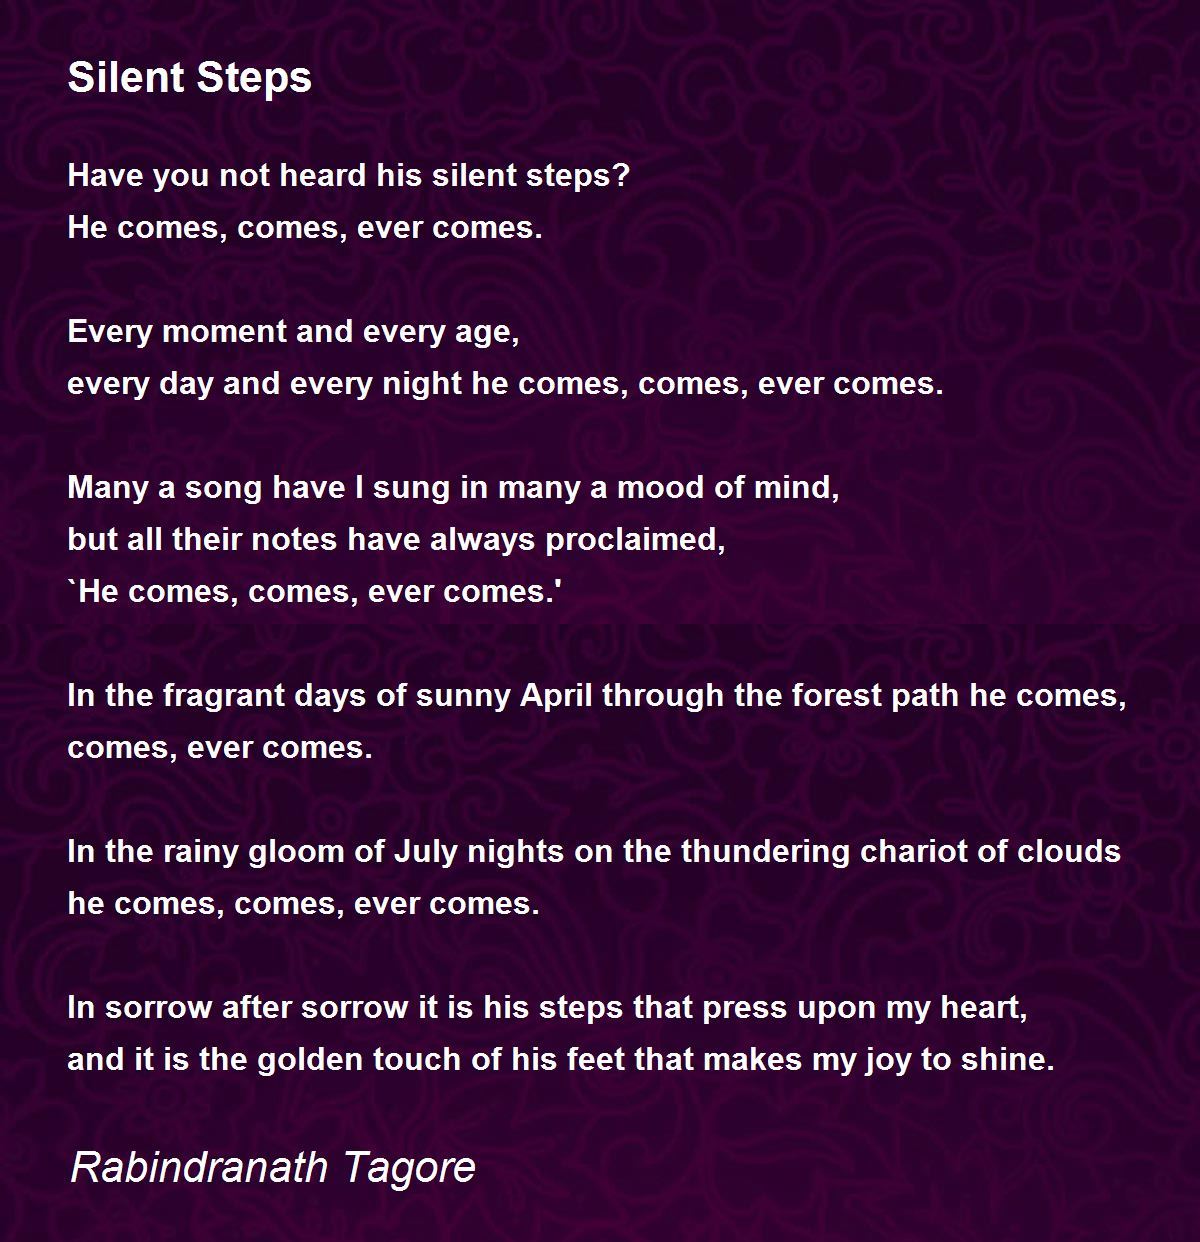 Silent Steps by Rabindranath Tagore - Silent Steps Poem